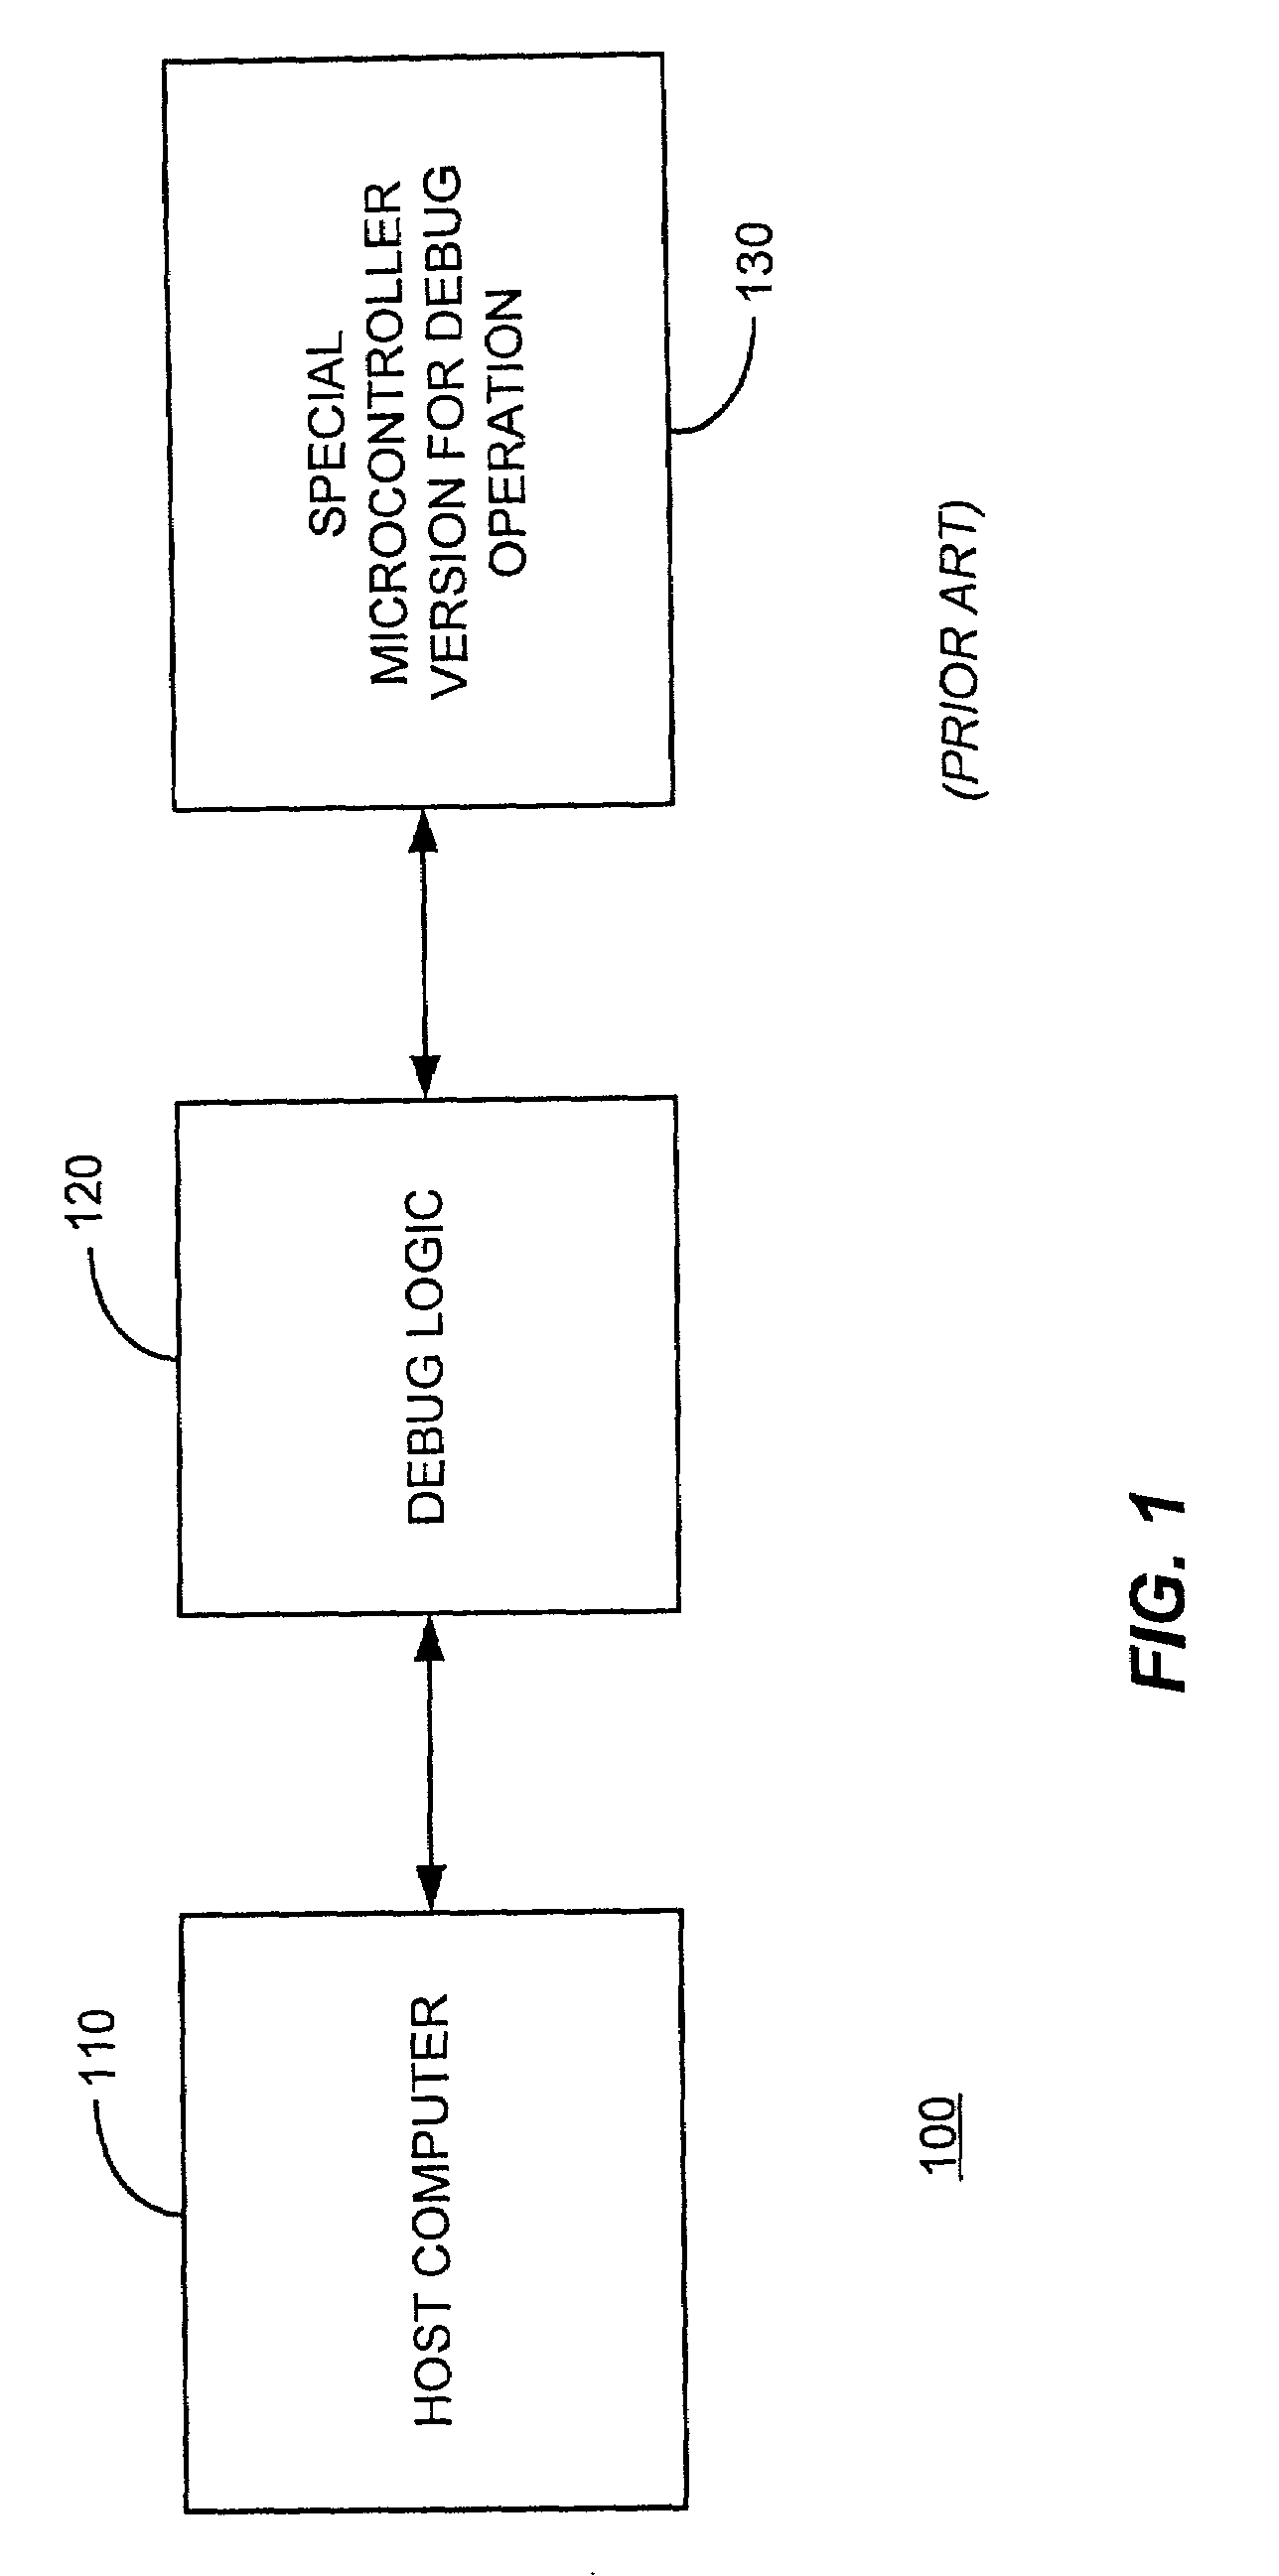 Host to FPGA interface in an in-circuit emulation system